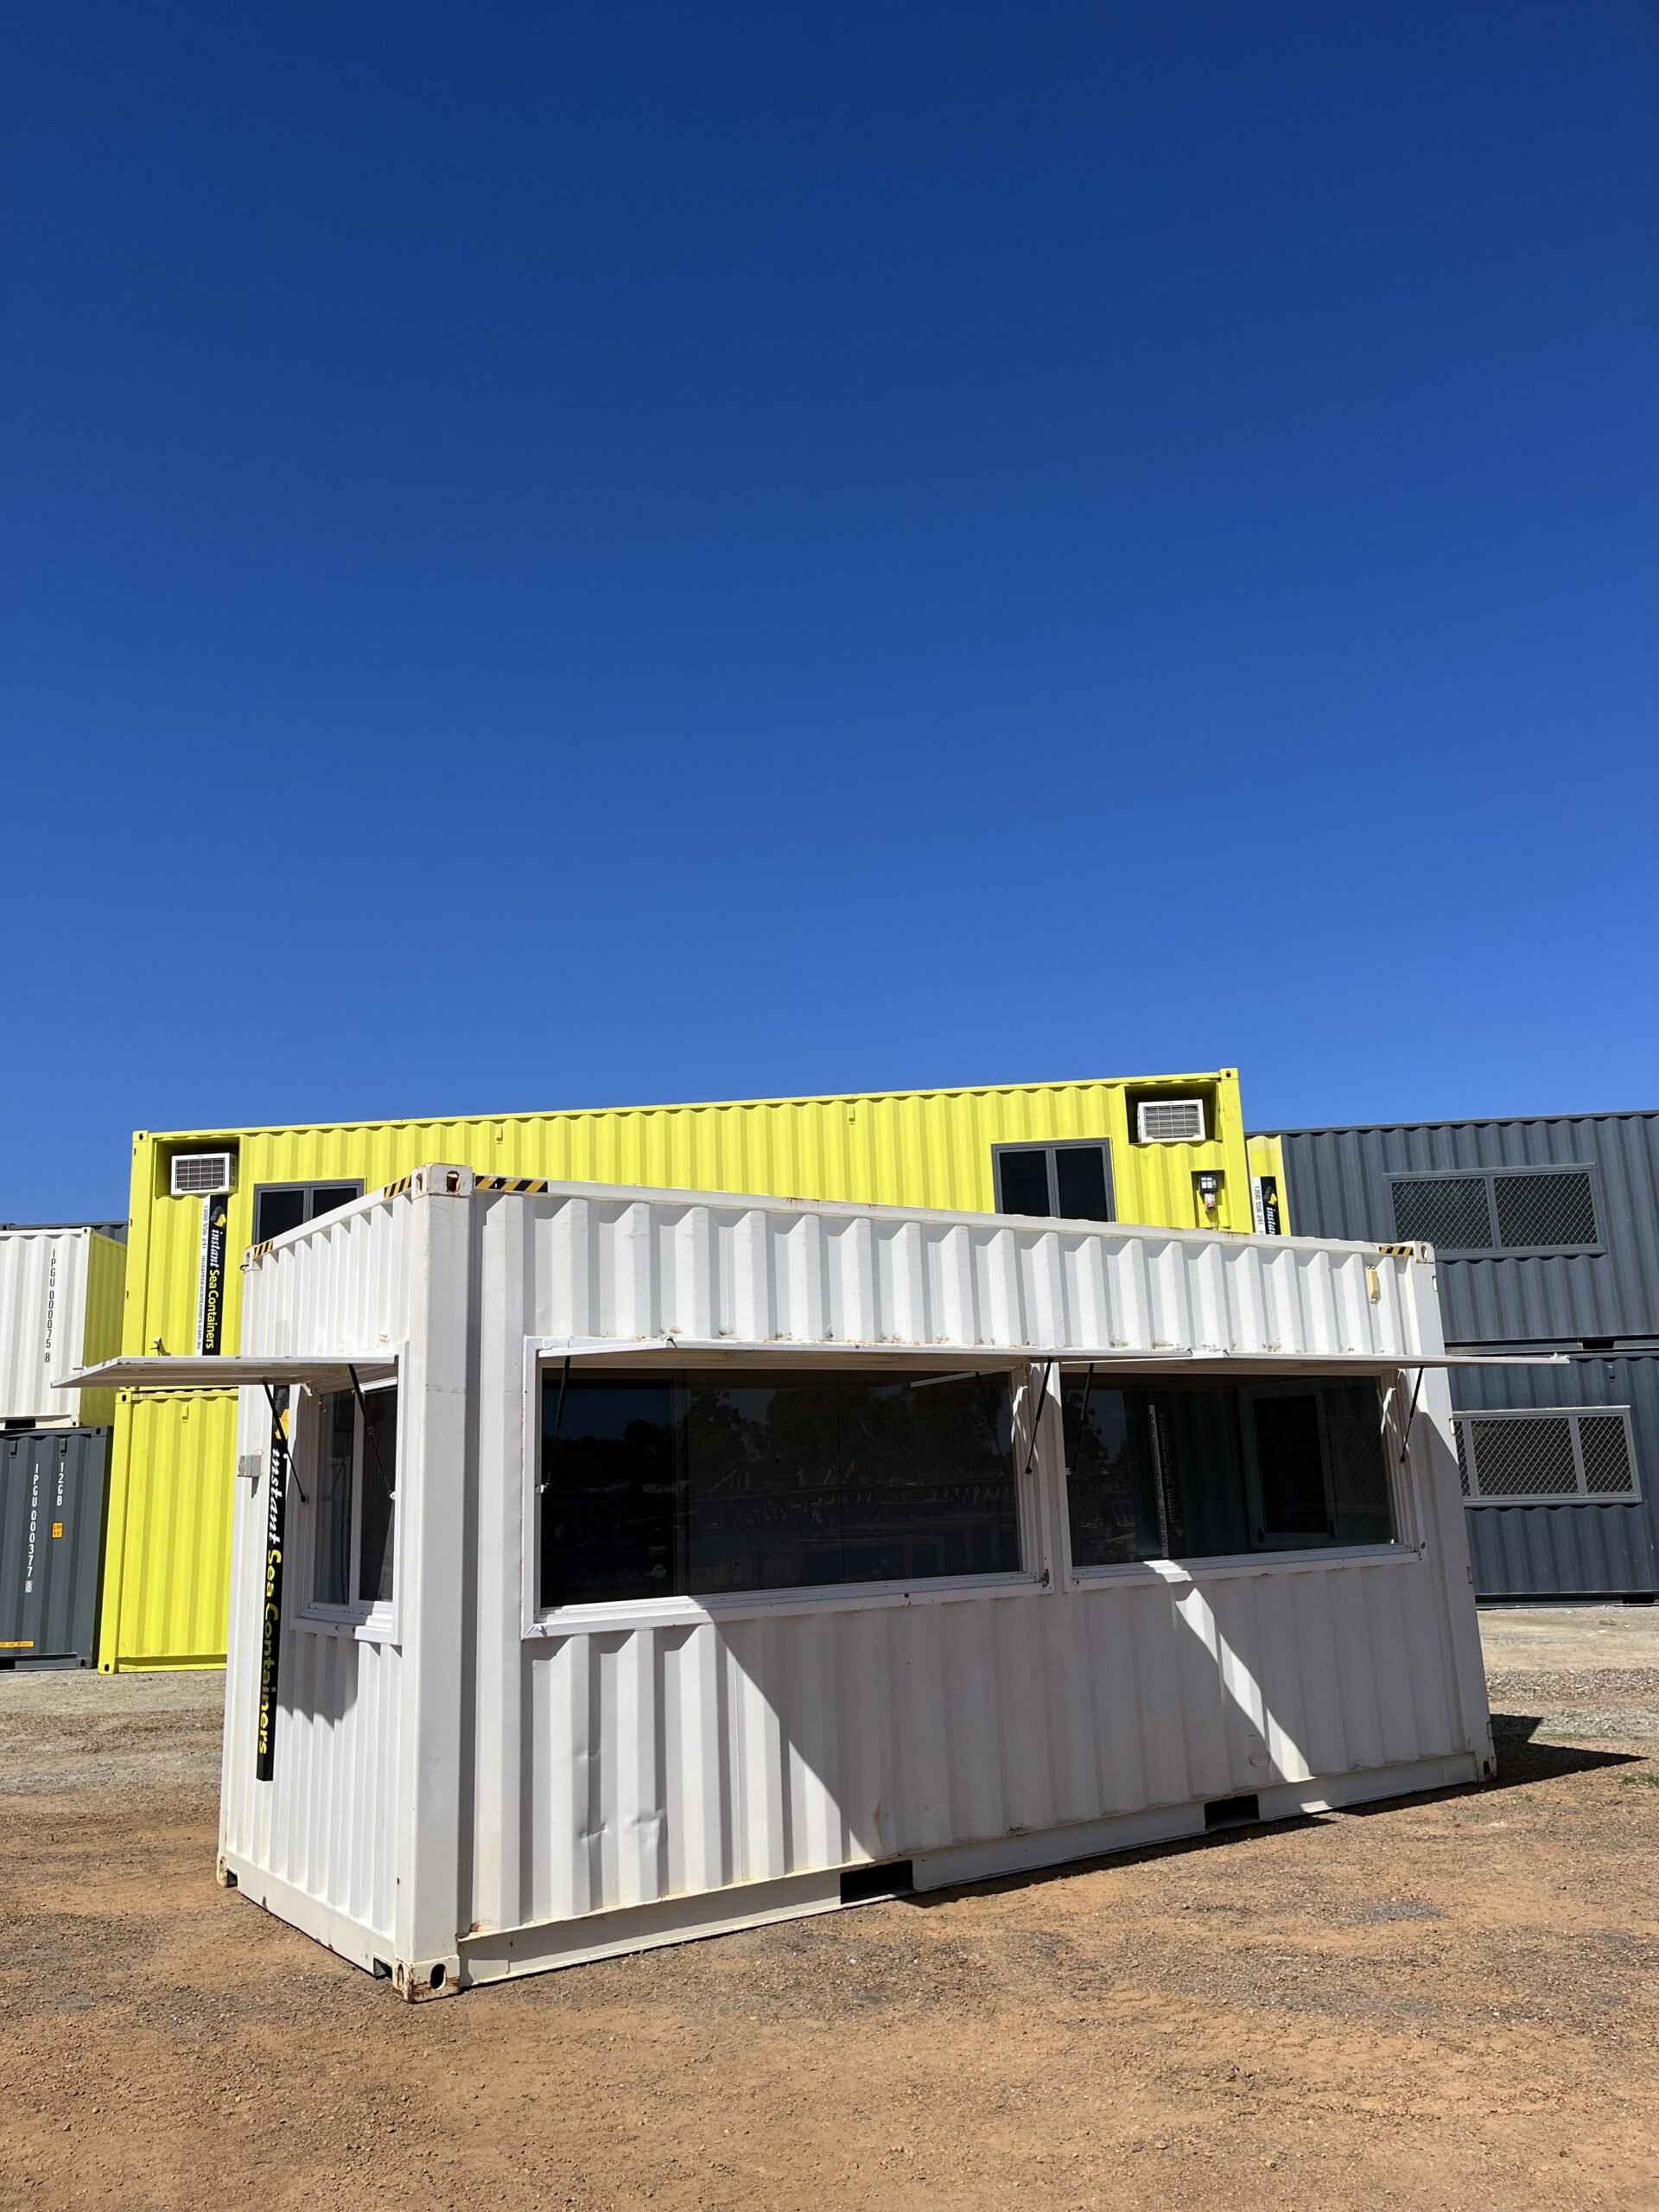 Shipping Container Control Room with a large window and awning, making it suitable for use as a mobile shop or cafe